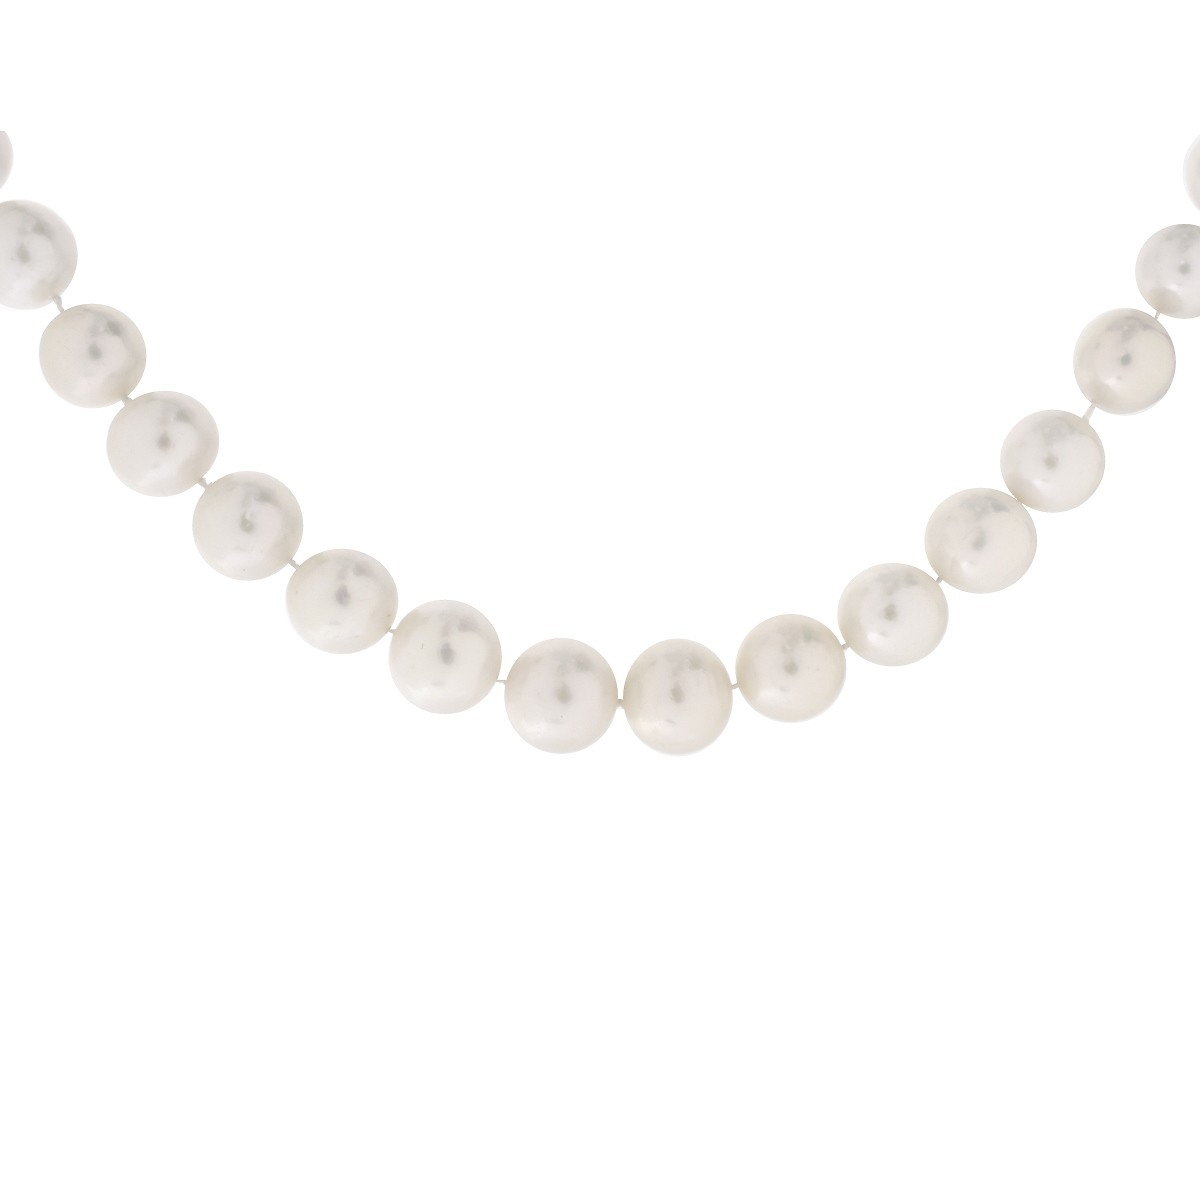 12.0-15.0 South Sea Pearl Necklace